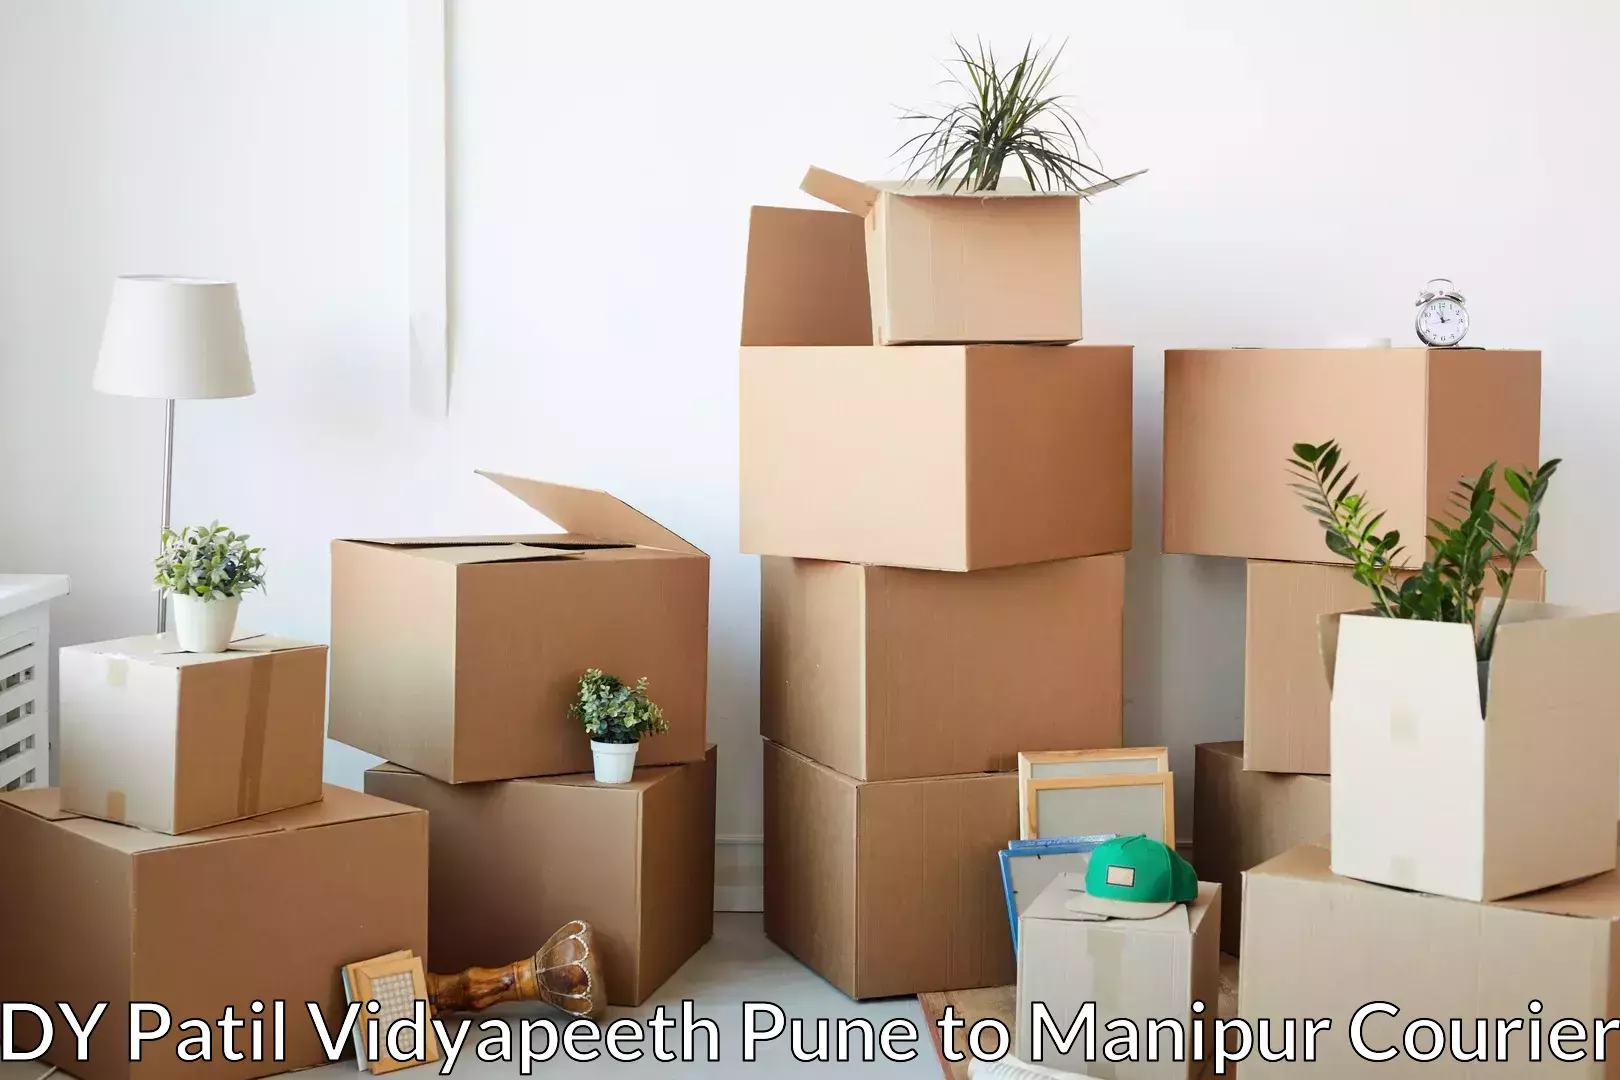 Home relocation solutions DY Patil Vidyapeeth Pune to Chandel